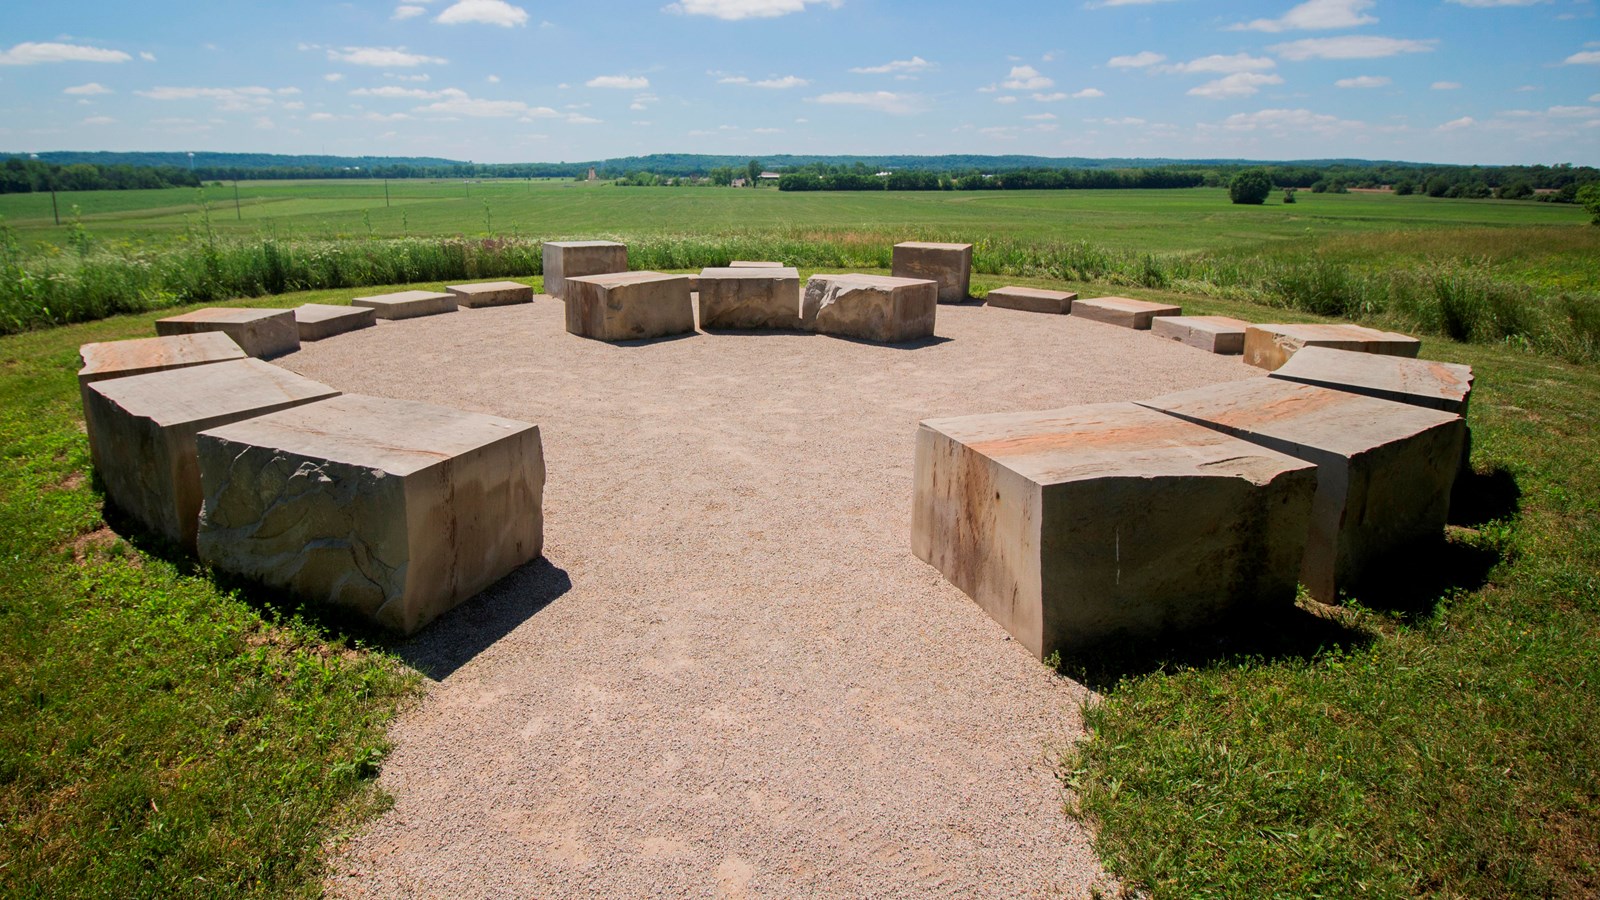 Large square stones patterned in a semi-circle placed upon gravel with grassy field in background